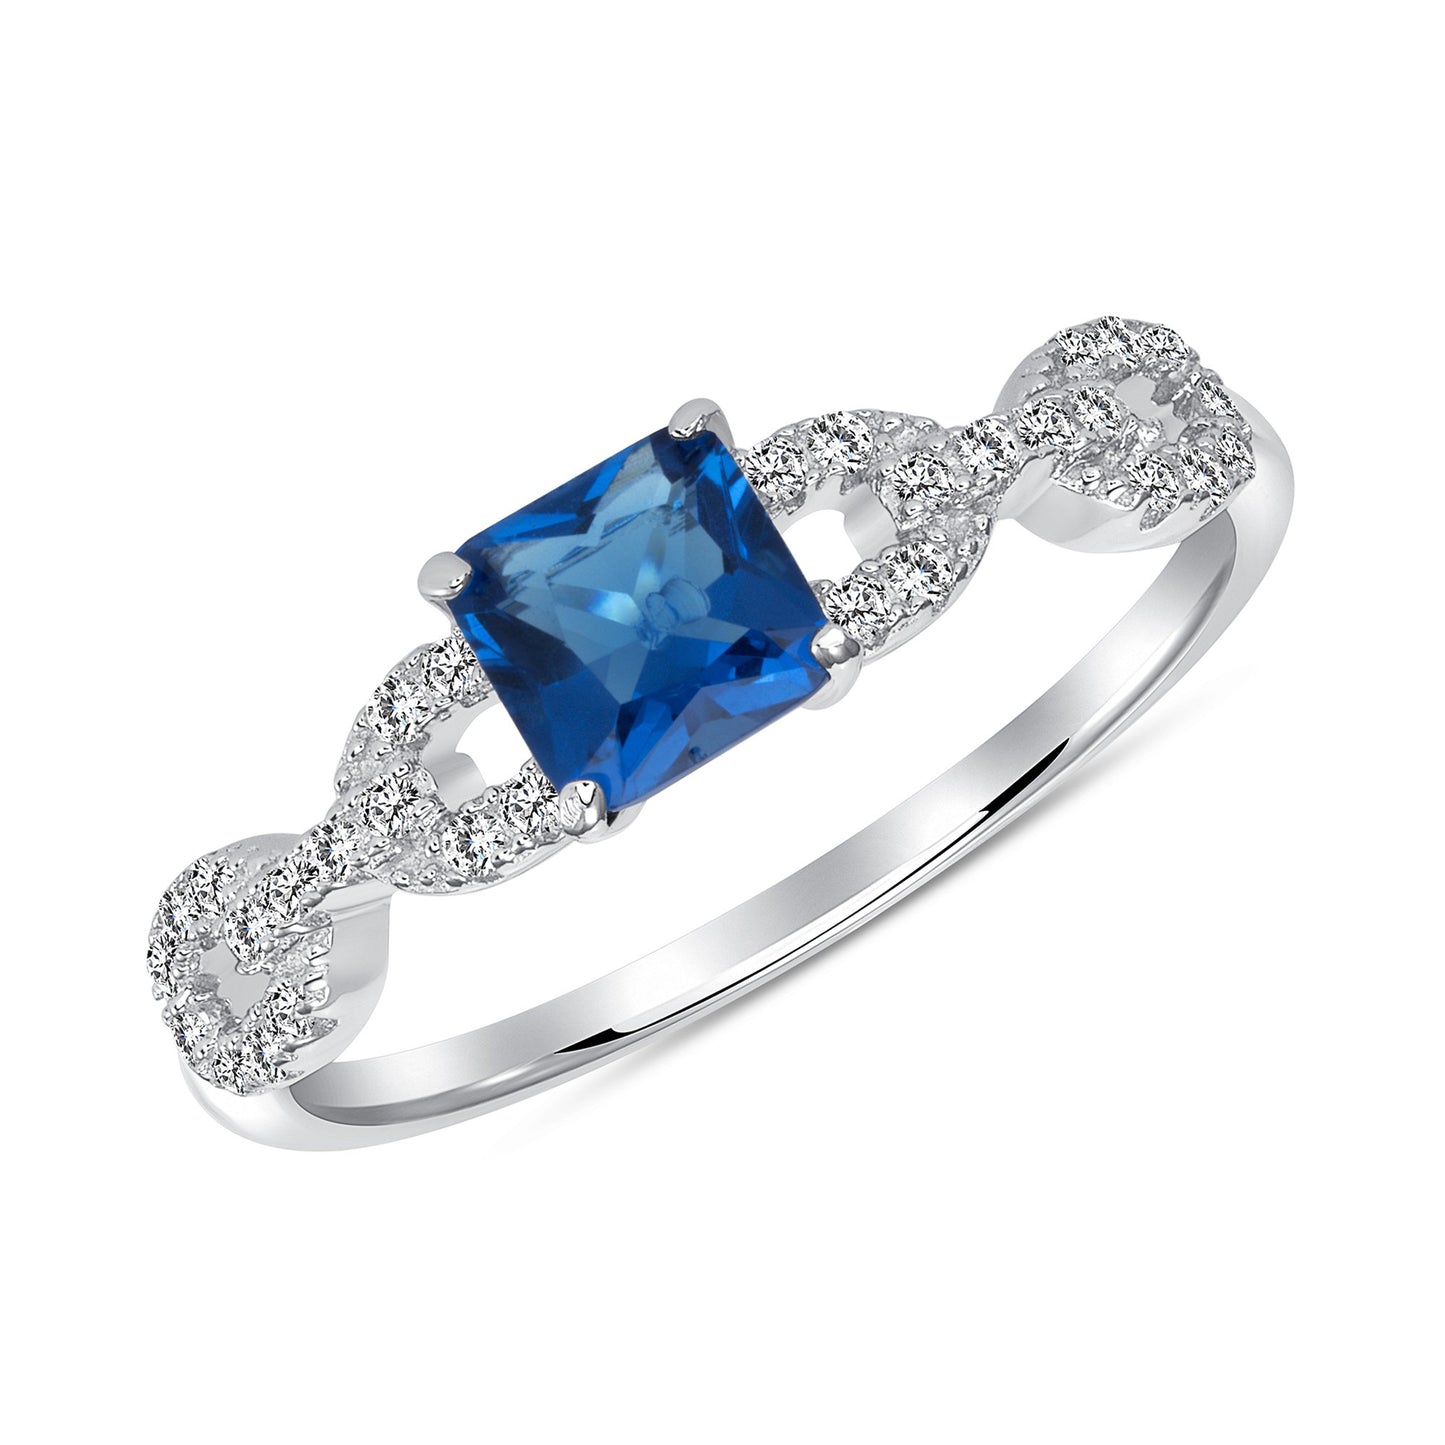 DGR1672BLU. Silver 925 Sapphire Solitaire Ring